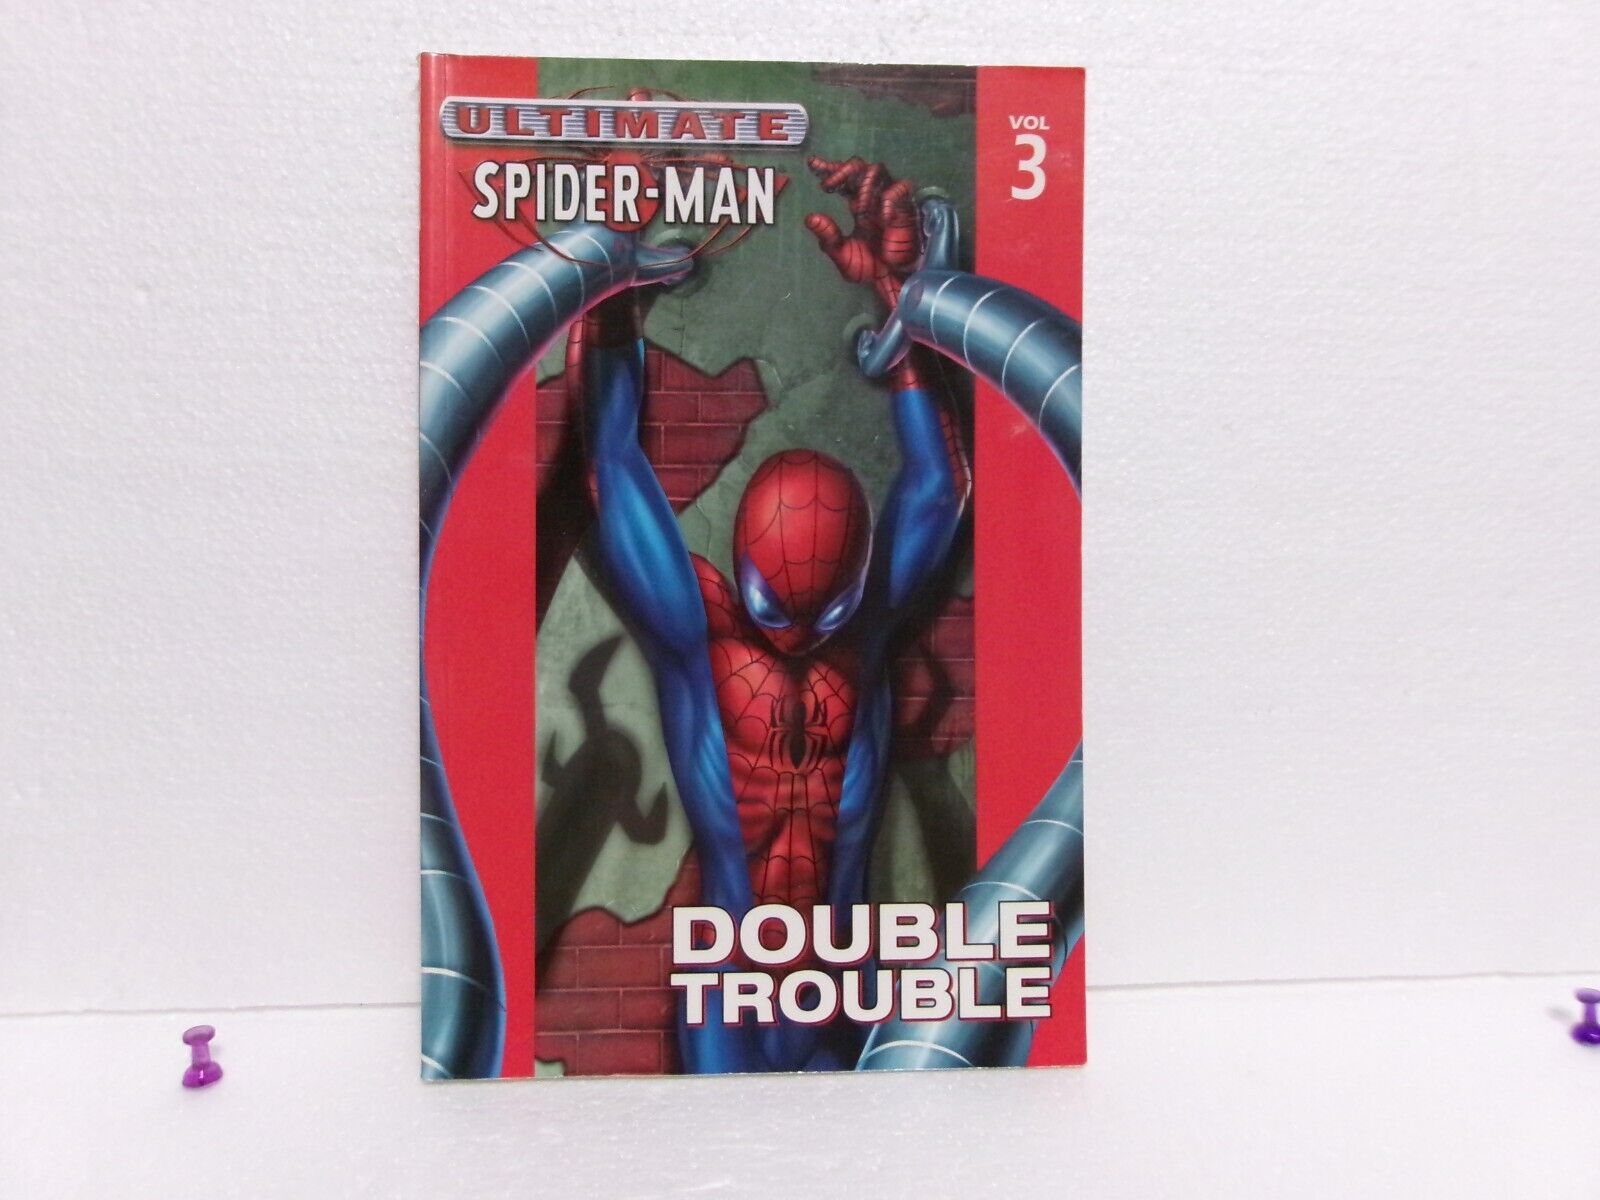 MARVEL ULTIMATE SPIDERMAN VOLUME 3 DOUBLE TROUBLE 2002 DIRECT EDITION